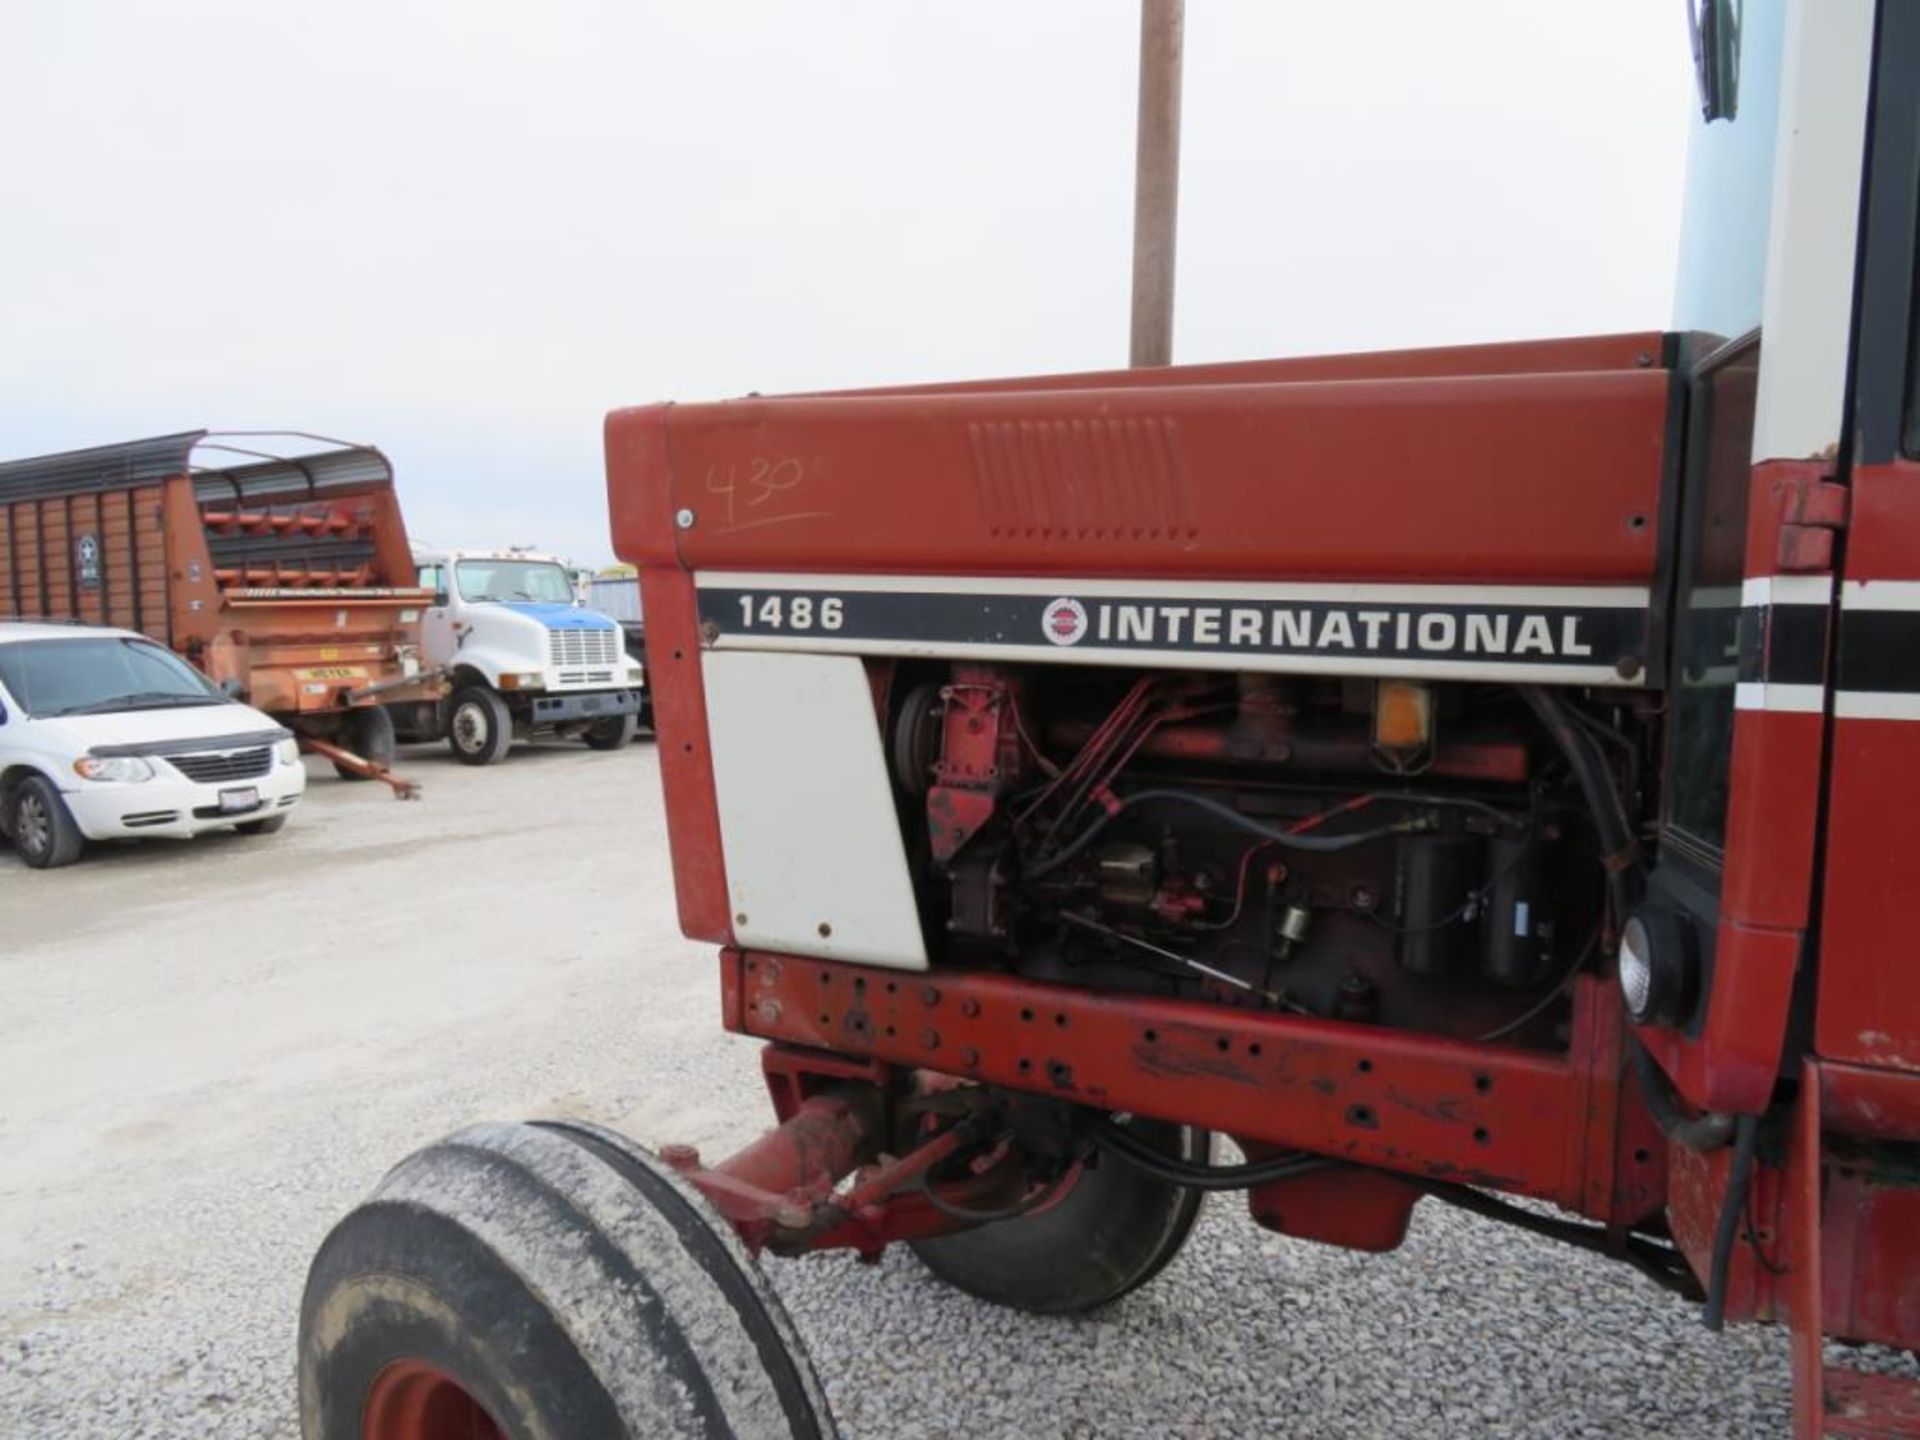 IH 1486 Tractor 16.9 - 35 Duals 30%, Dual PTO, Needs Battery, Interior in rough shape, was used this - Image 12 of 13